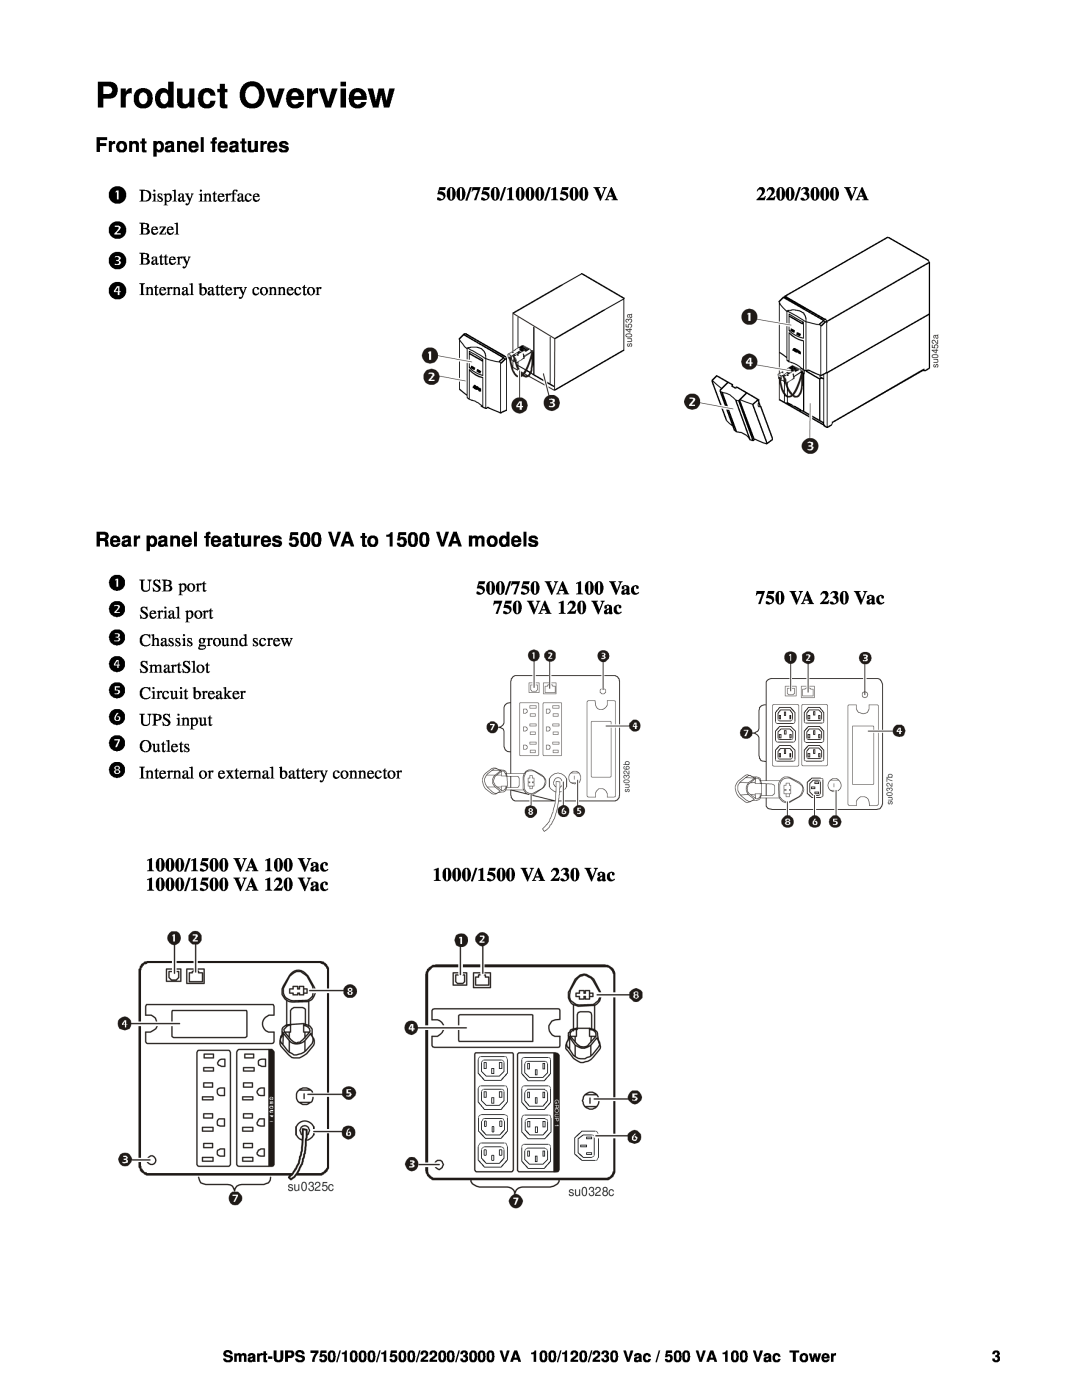 TRENDnet SMT1000 operation manual Product Overview, su0325c, su0328c, su0453a, su0452a, su0326b, su0327b, G Ro U P 